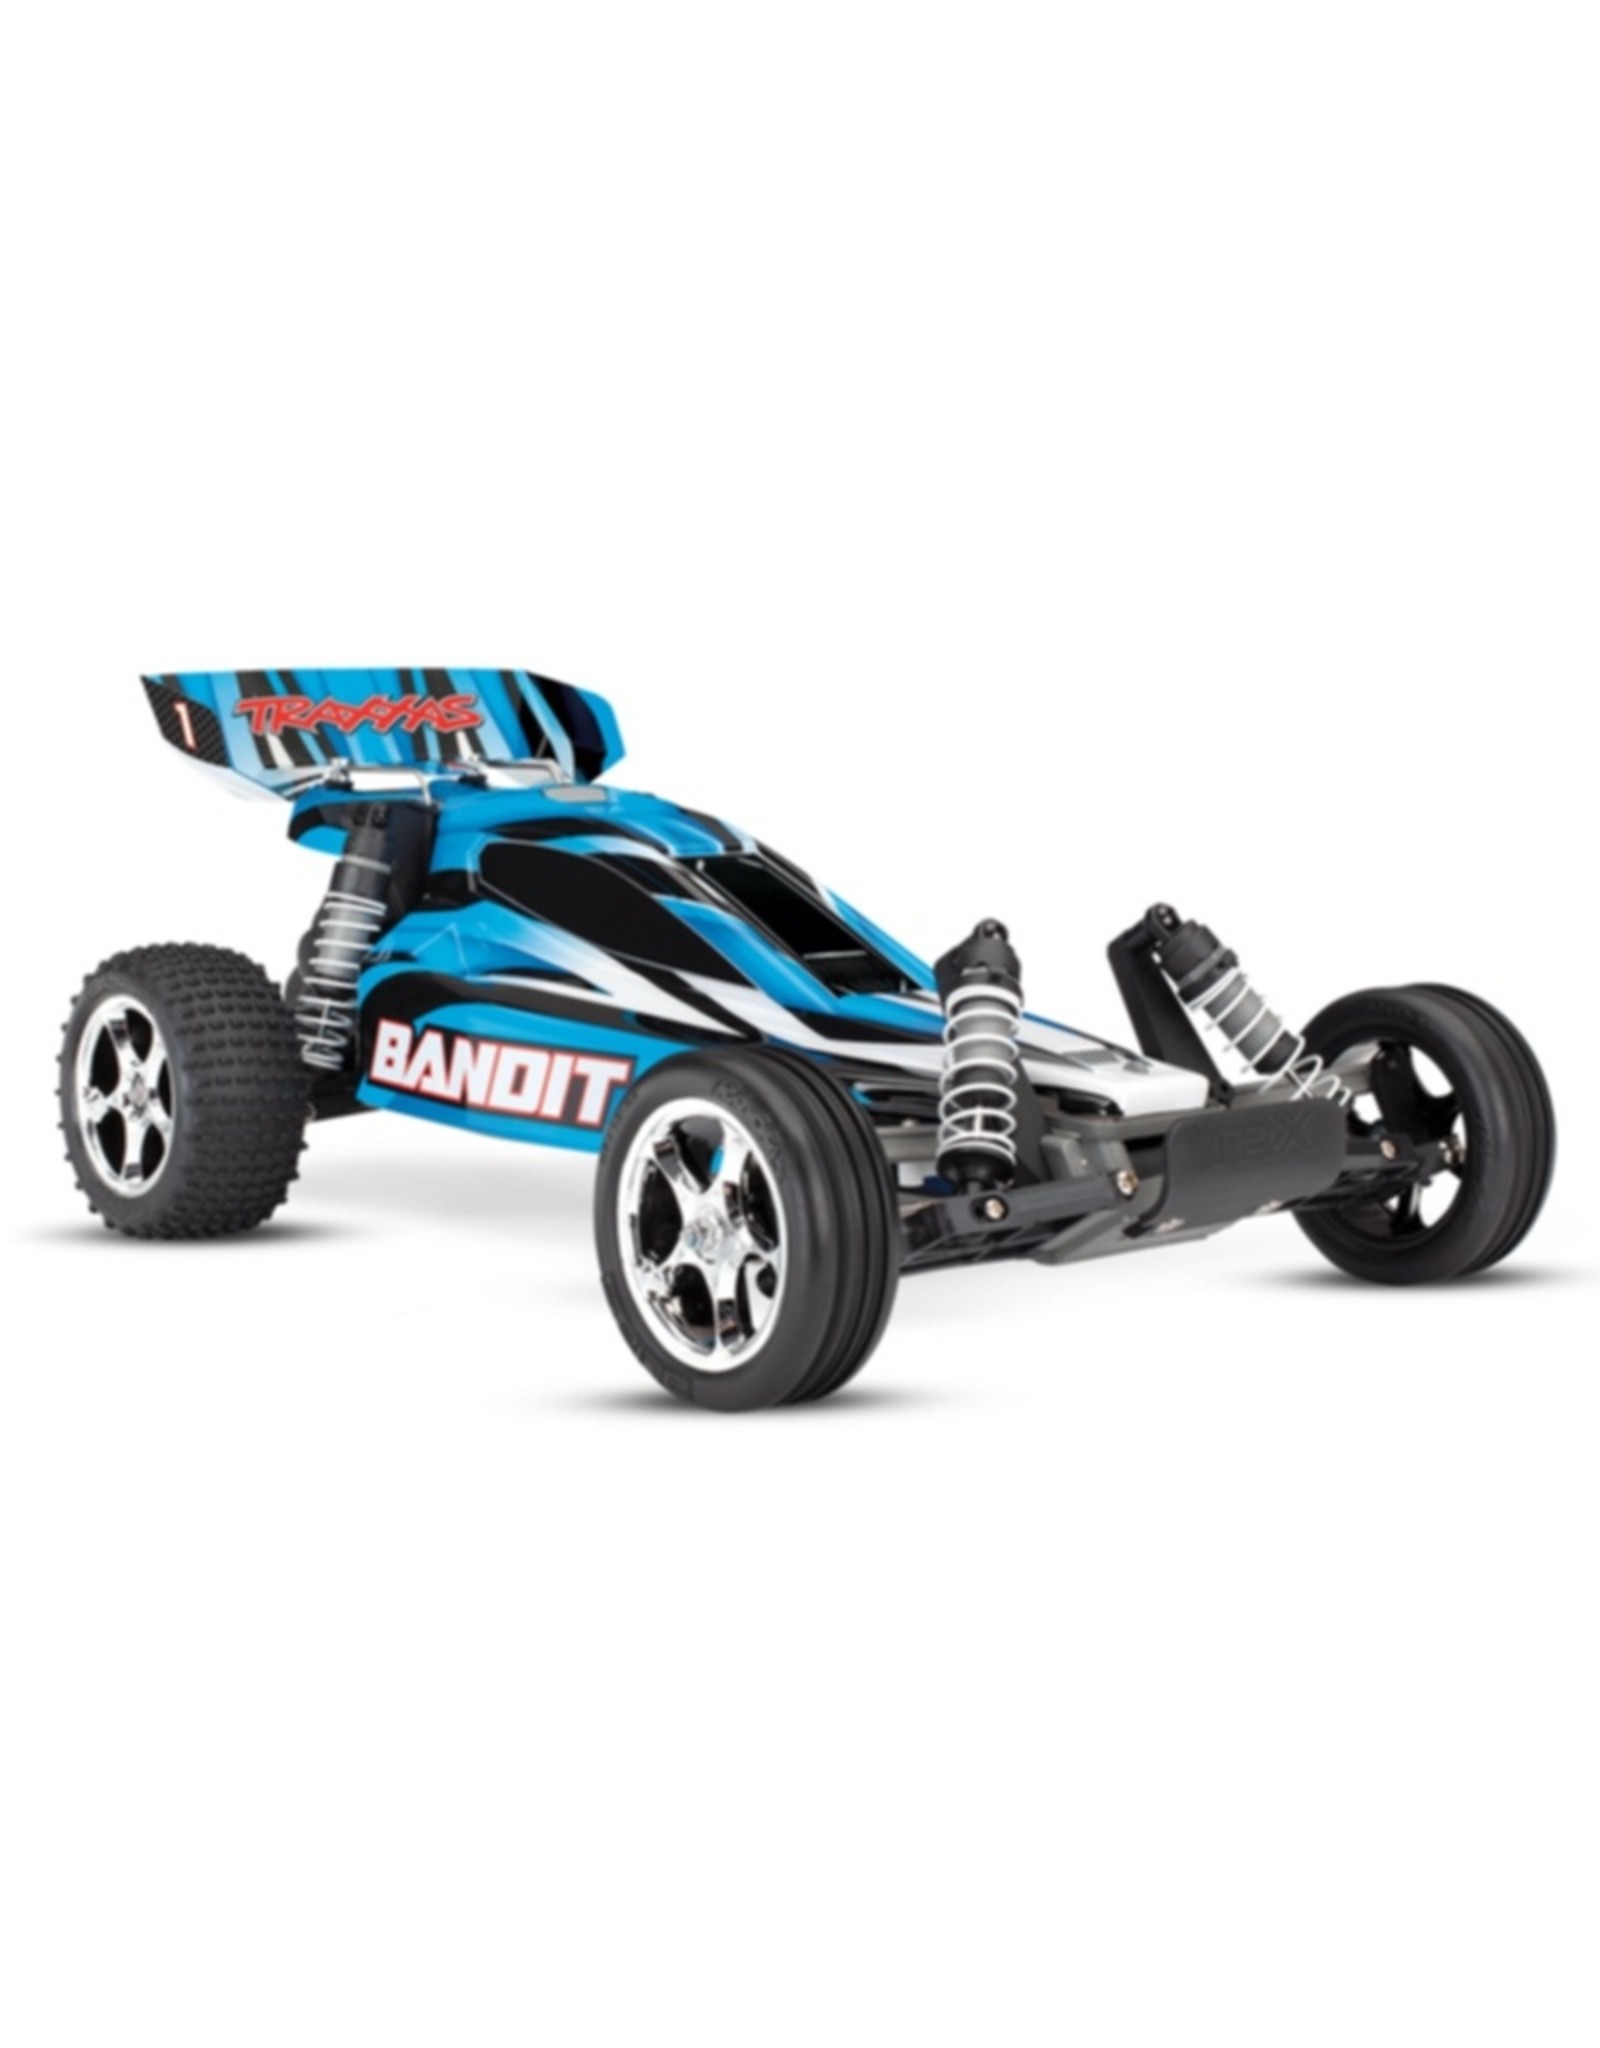 Traxxas TRA24054-4 Blue Bandit : 1/10 Scale Off-Road Buggy with TQ 2.4GHz radio system